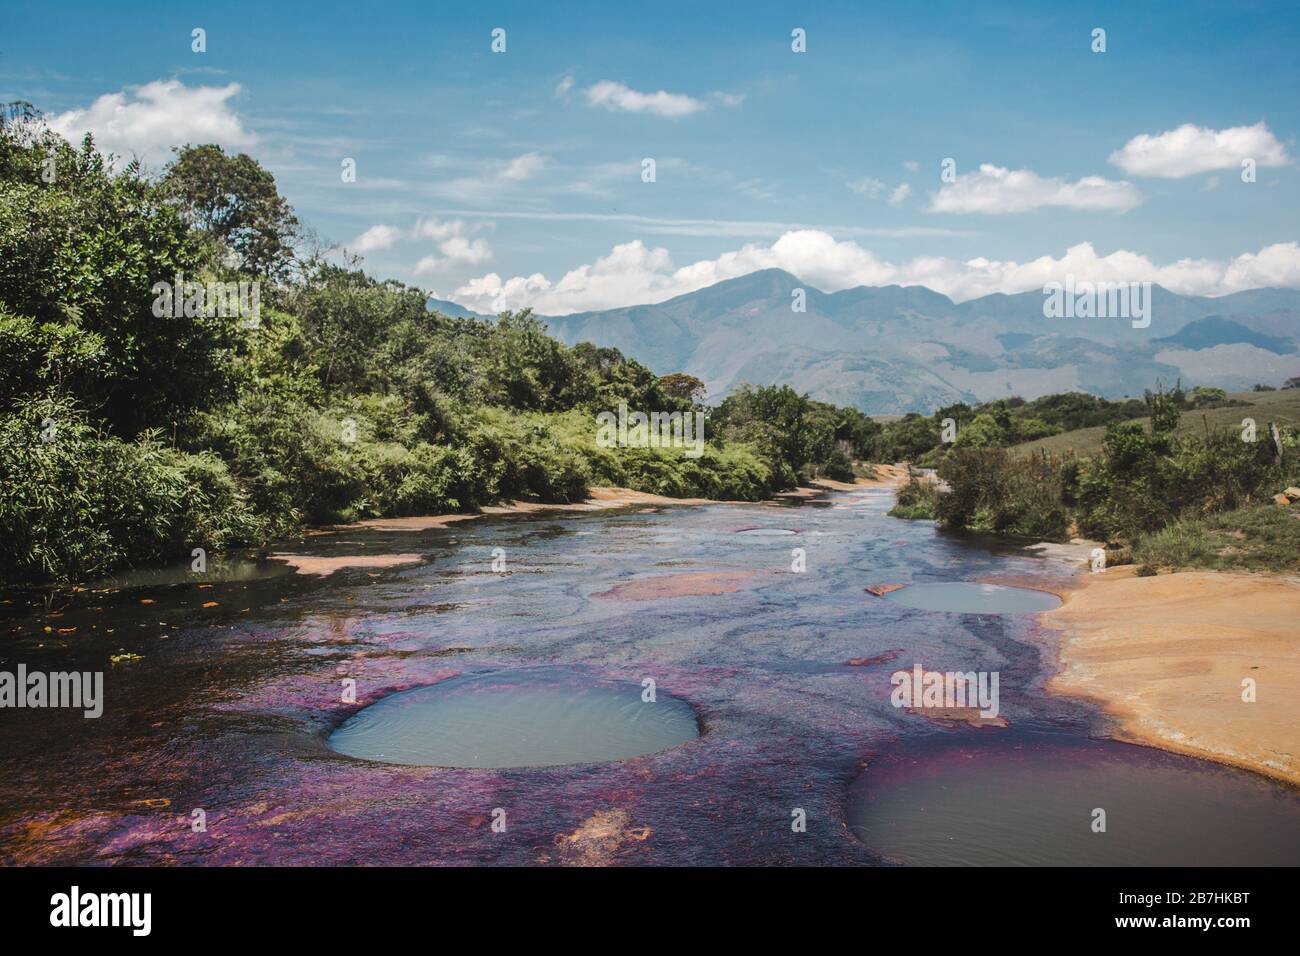 Natural phenomenon of Quebrada las Gachas in Guadalupe, Colombia. These are natural plunge pools of up to 6ft in the purple algae-colored riverbed Stock Photo